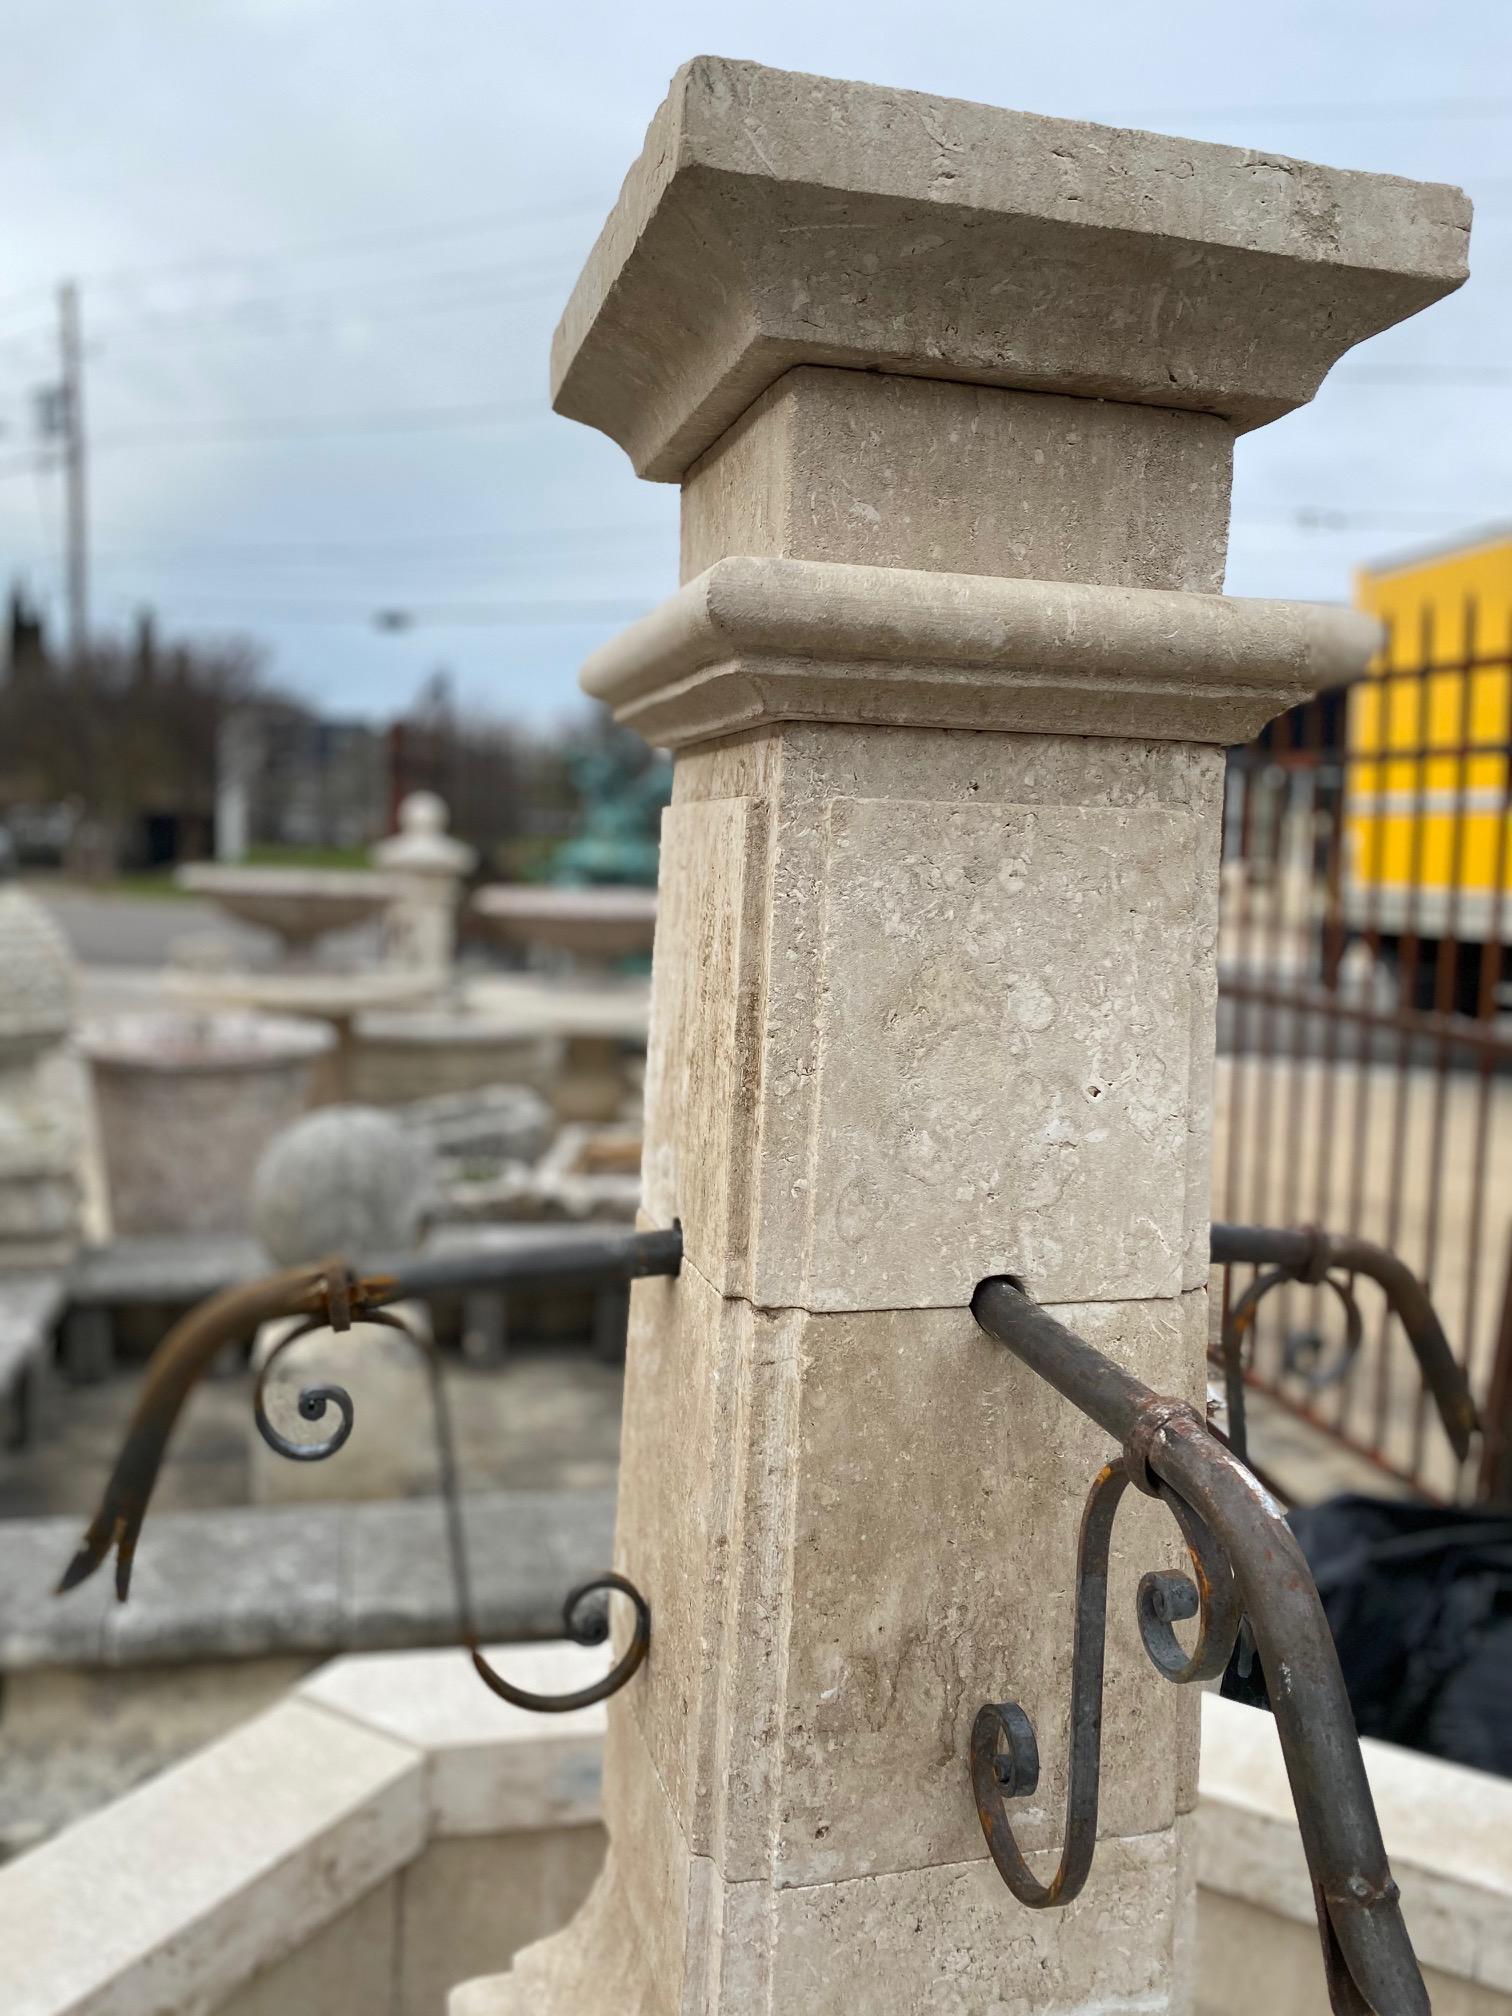 Here we offer a hand carved limestone central fountain with four iron down spouts. This piece stands tall and can be admired from a distance as part of the landscape design or be the focal point of your courtyard or garden as it fills the air with